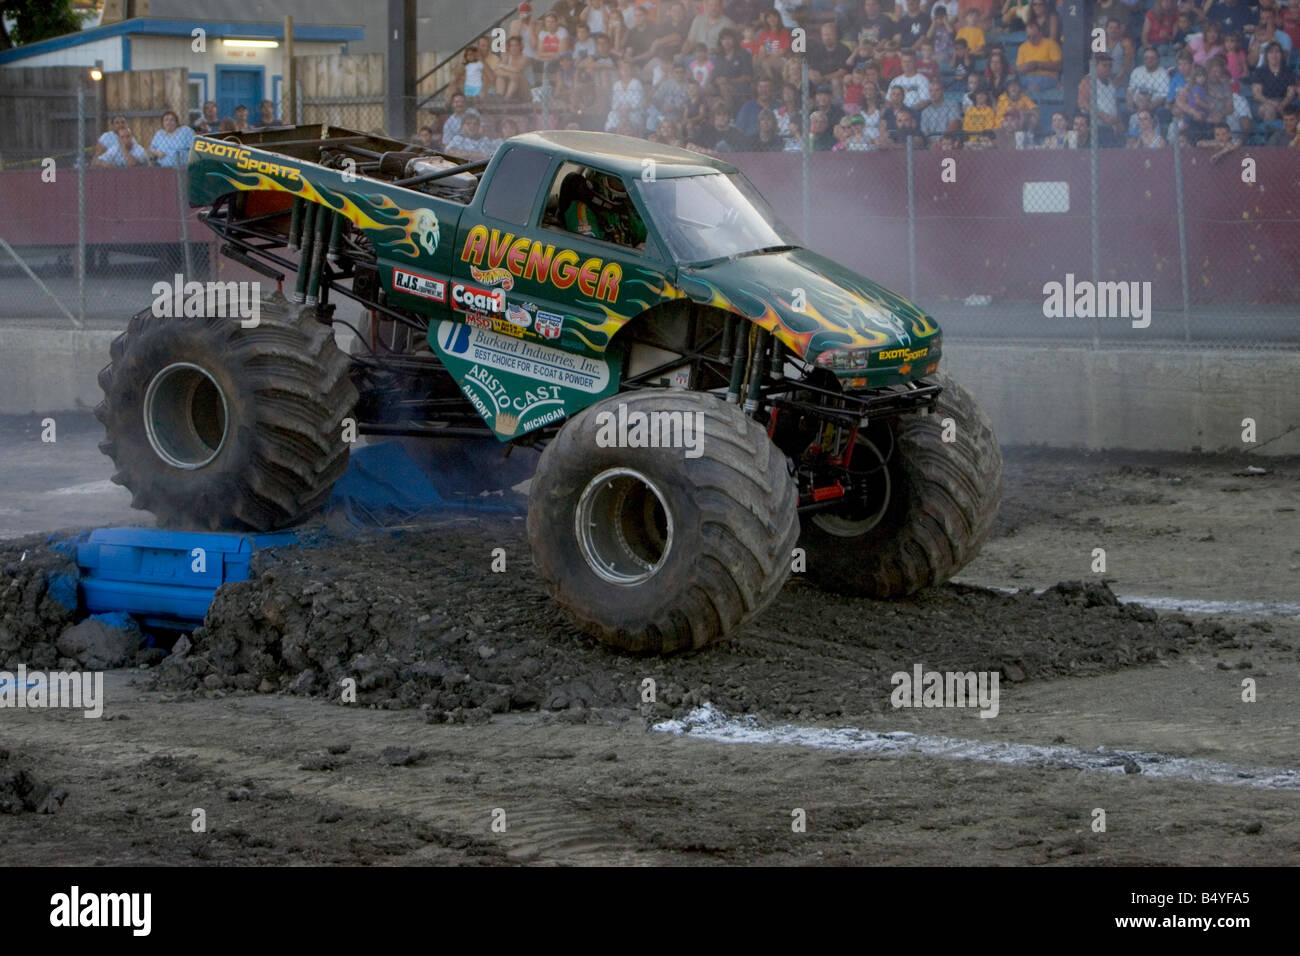 MONSTER TRUCK Avenger concorrenti a il Monster Truck Challenge all'Orange County Fair di NY Speedway Foto Stock